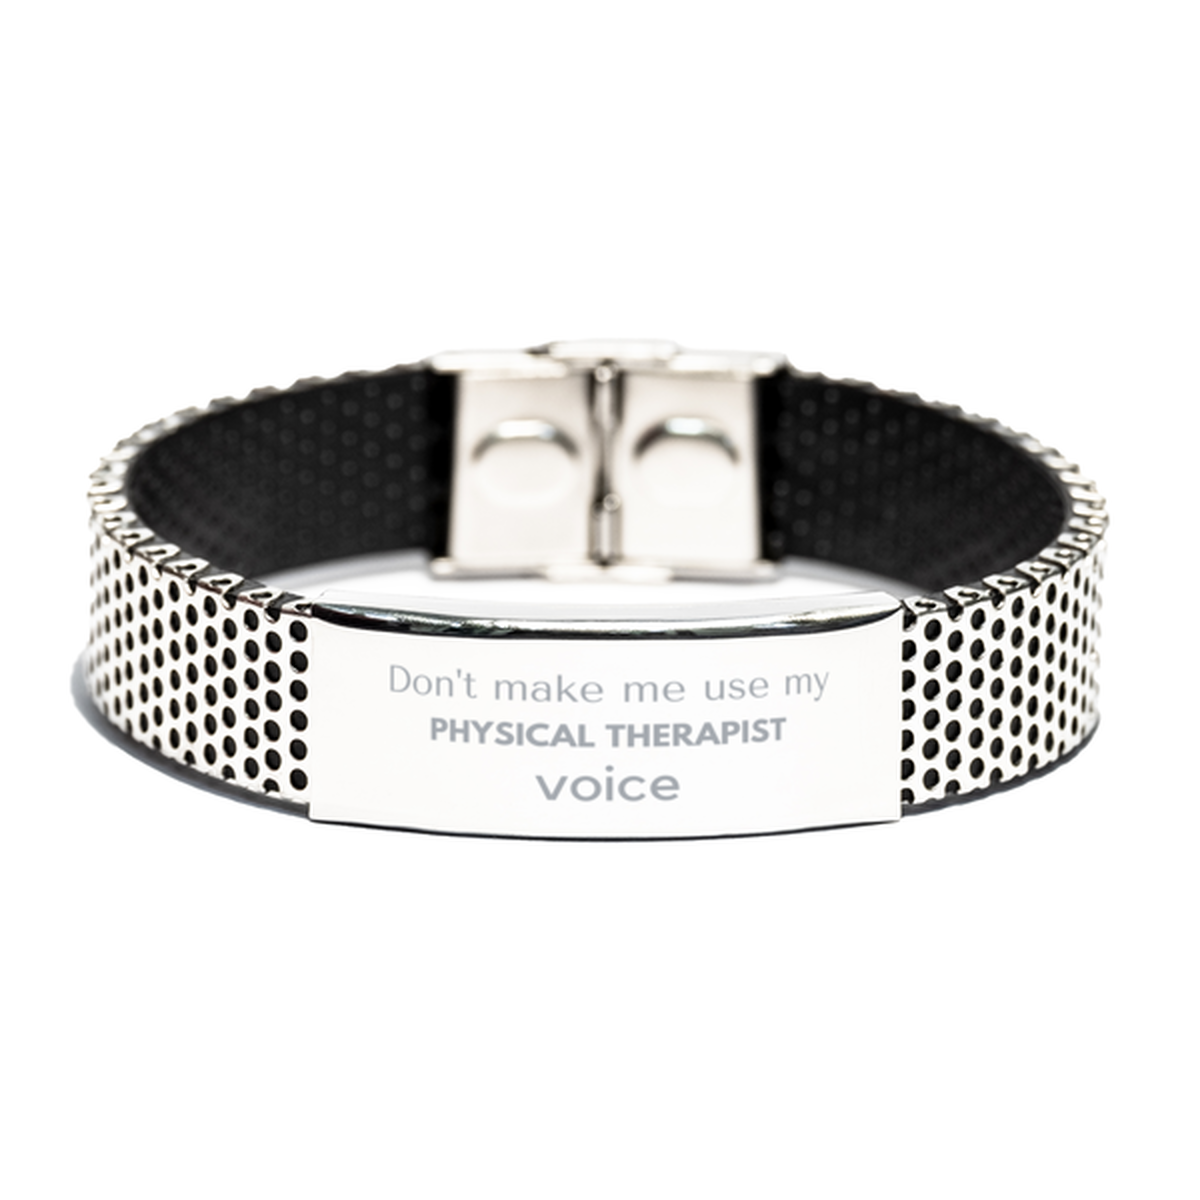 Don't make me use my Physical Therapist voice, Sarcasm Physical Therapist Gifts, Christmas Physical Therapist Stainless Steel Bracelet Birthday Unique Gifts For Physical Therapist Coworkers, Men, Women, Colleague, Friends